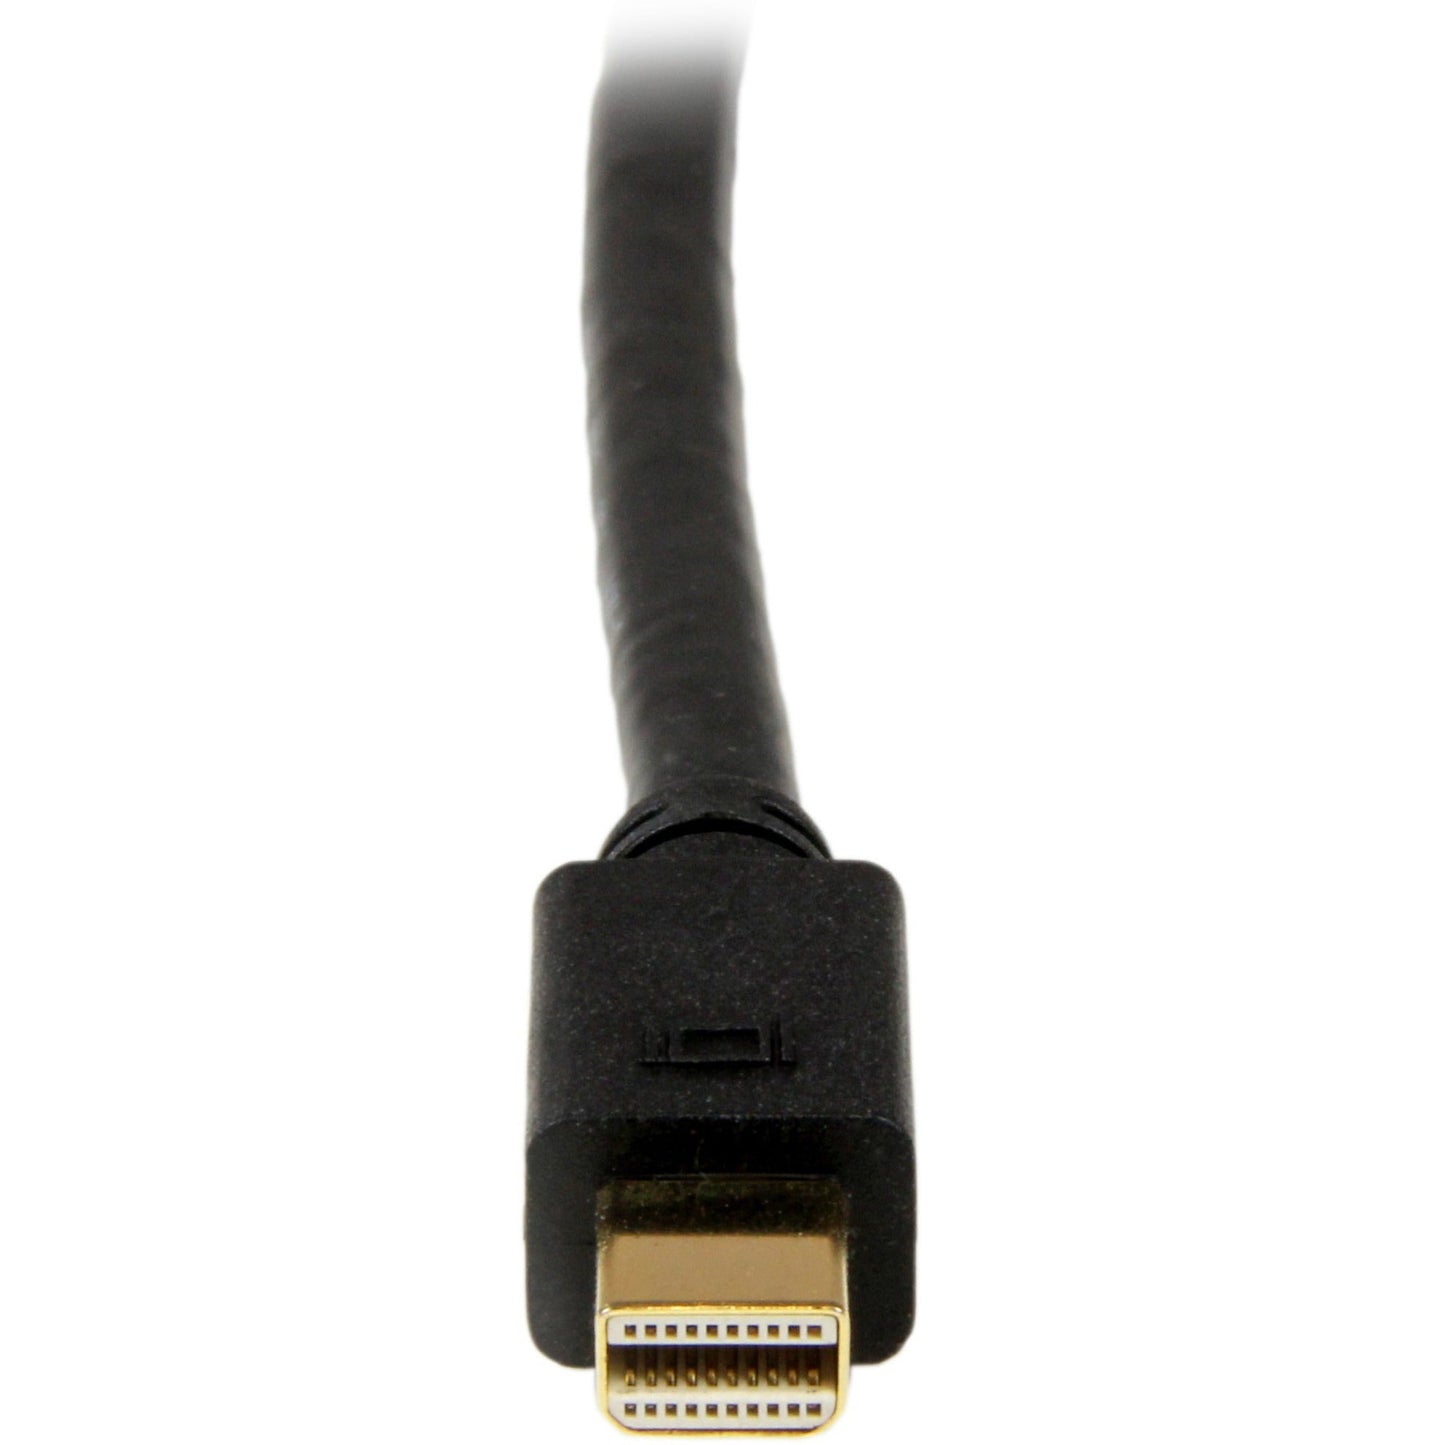 StarTech.com 3ft Mini DisplayPort to DVI Cable Mini DP to DVI-D Adapter/Converter Cable 1080p Video mDP 1.2 to DVI Monitor/Display